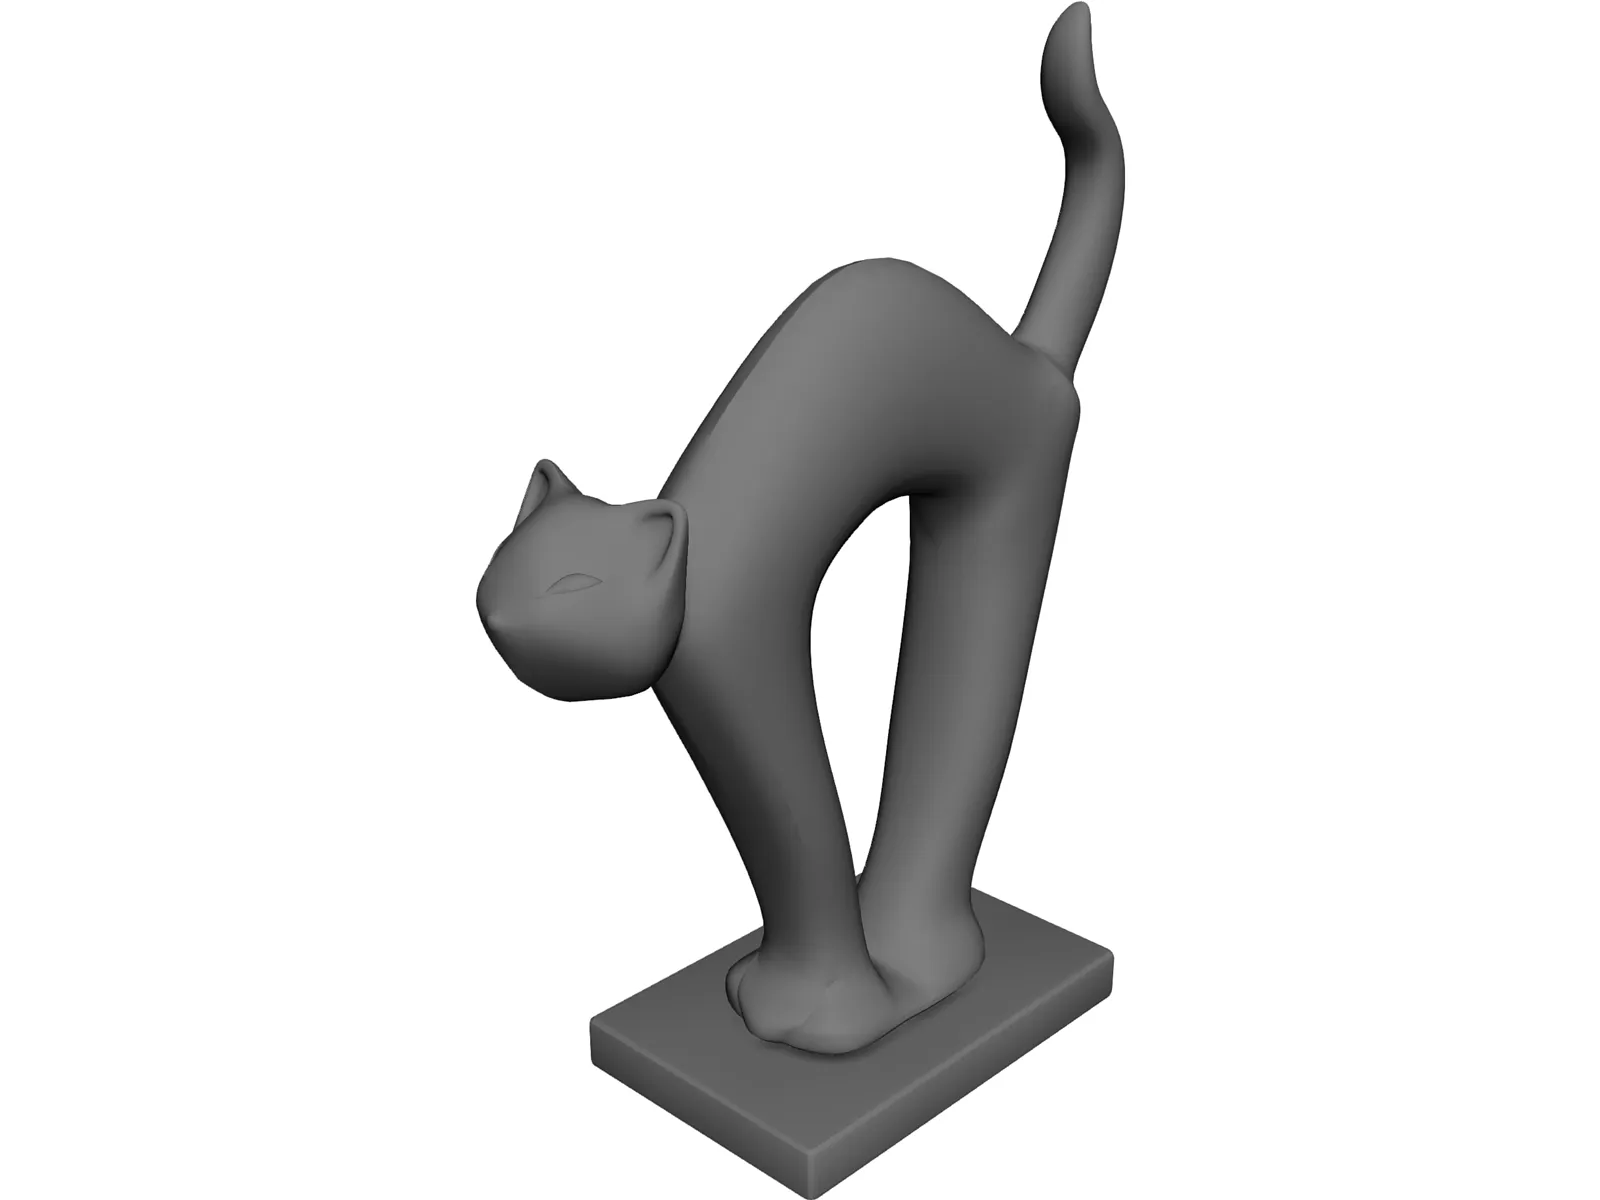 Abstract Cat Statue 3D Model